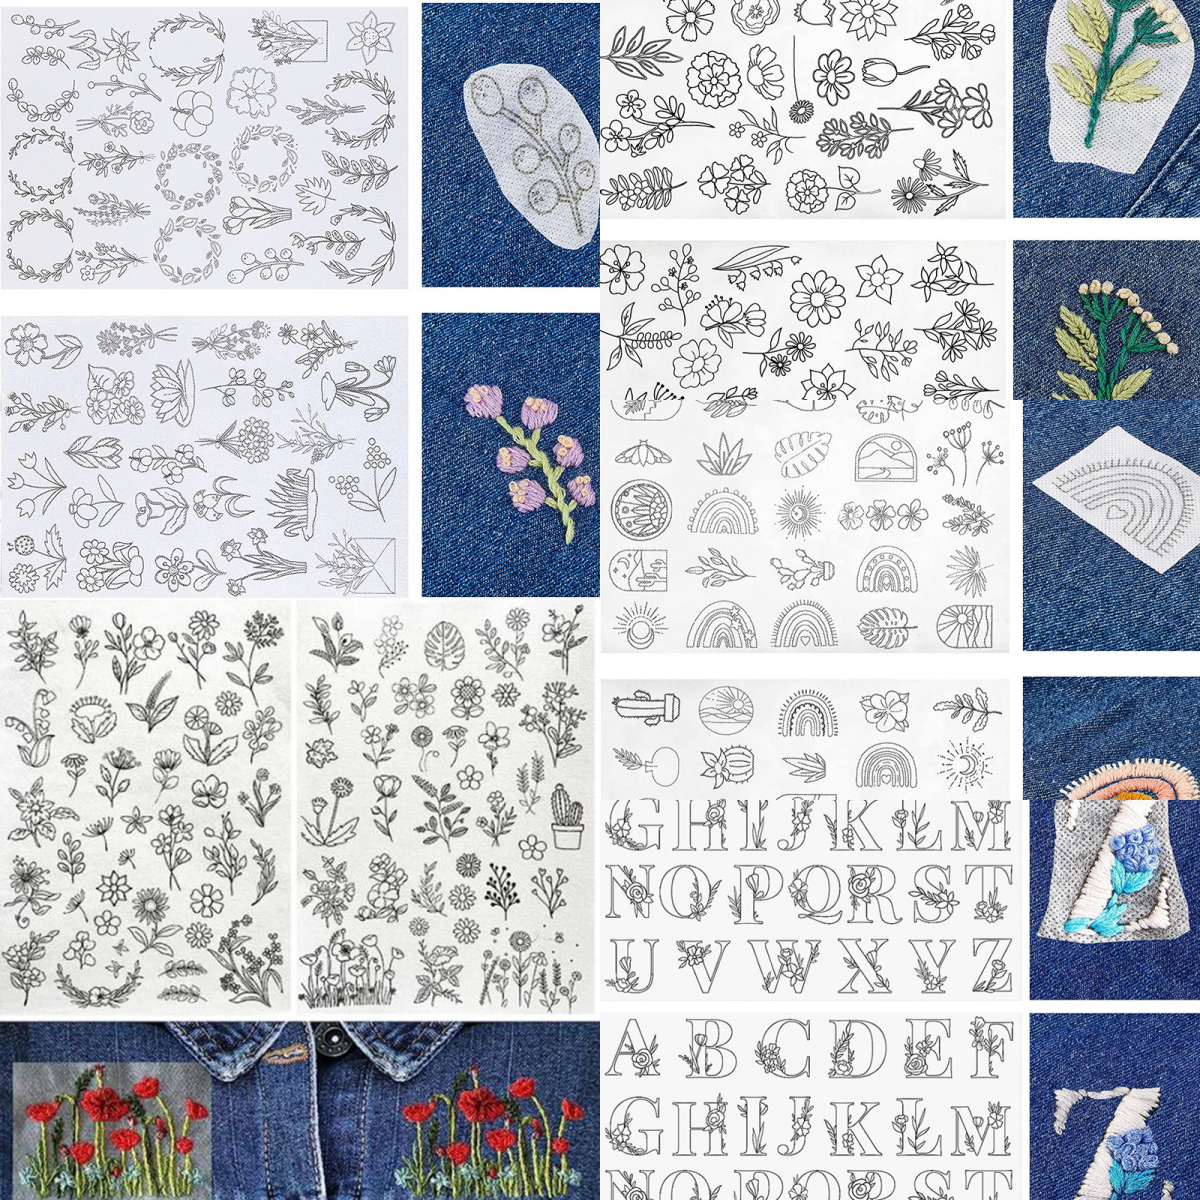 (🔥Hot Sale Promotion-SAVE 50% OFF)Water Soluble Flower Patterns for Embroidery (50 Pcs Flower Patterns/SET)🔥Buy 5 Sets Get 20% OFF